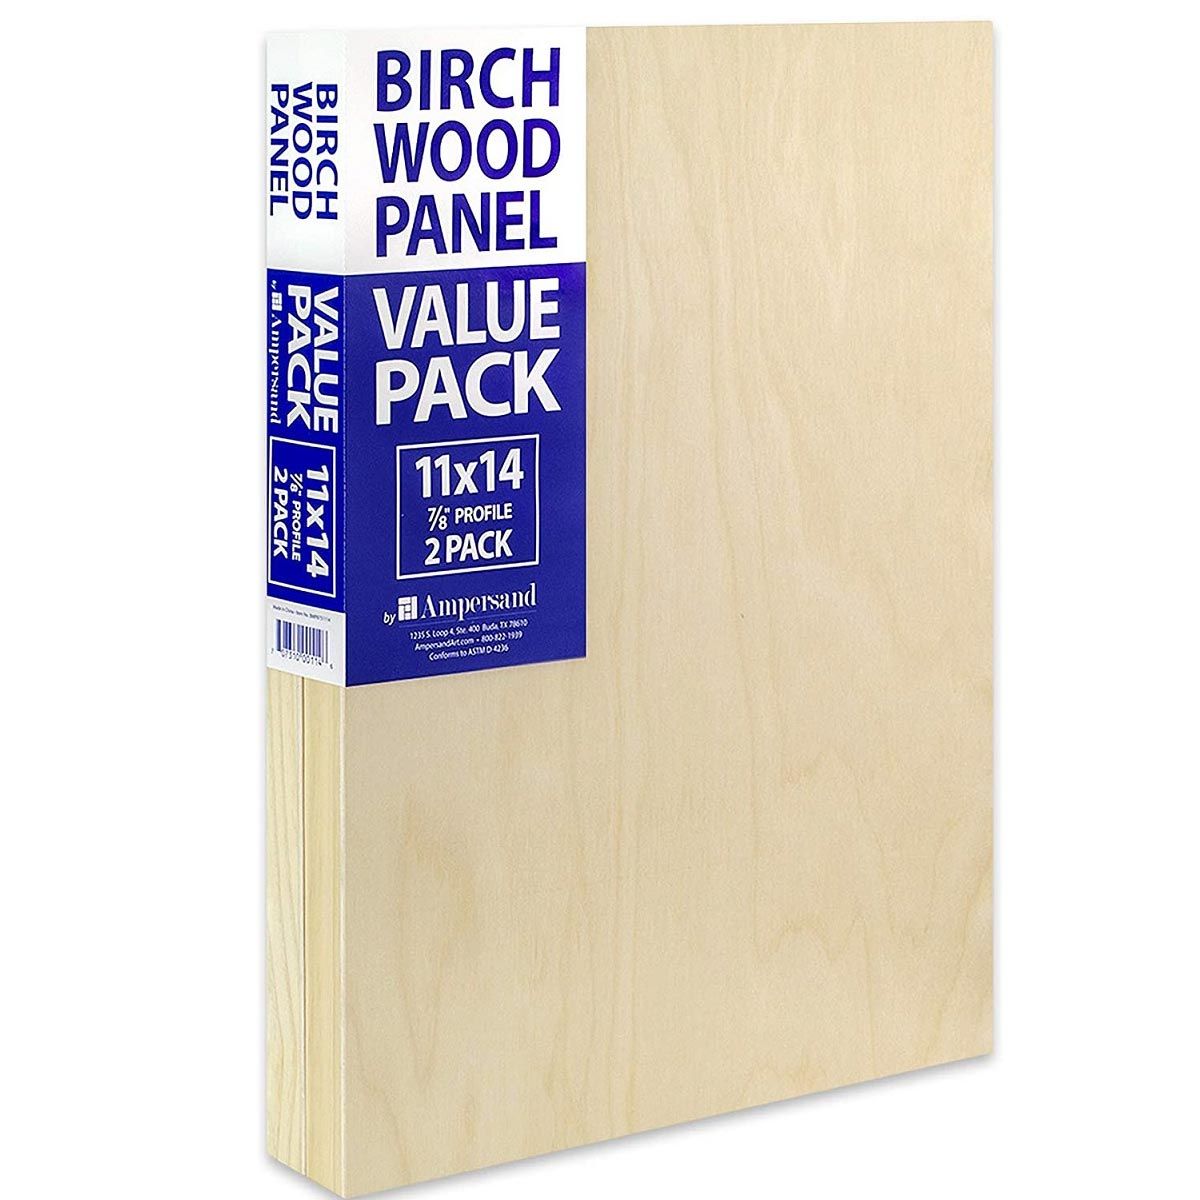 Ampersand Birch Wood 7/8" Panel, Value Pack 2-11 x 14 inches